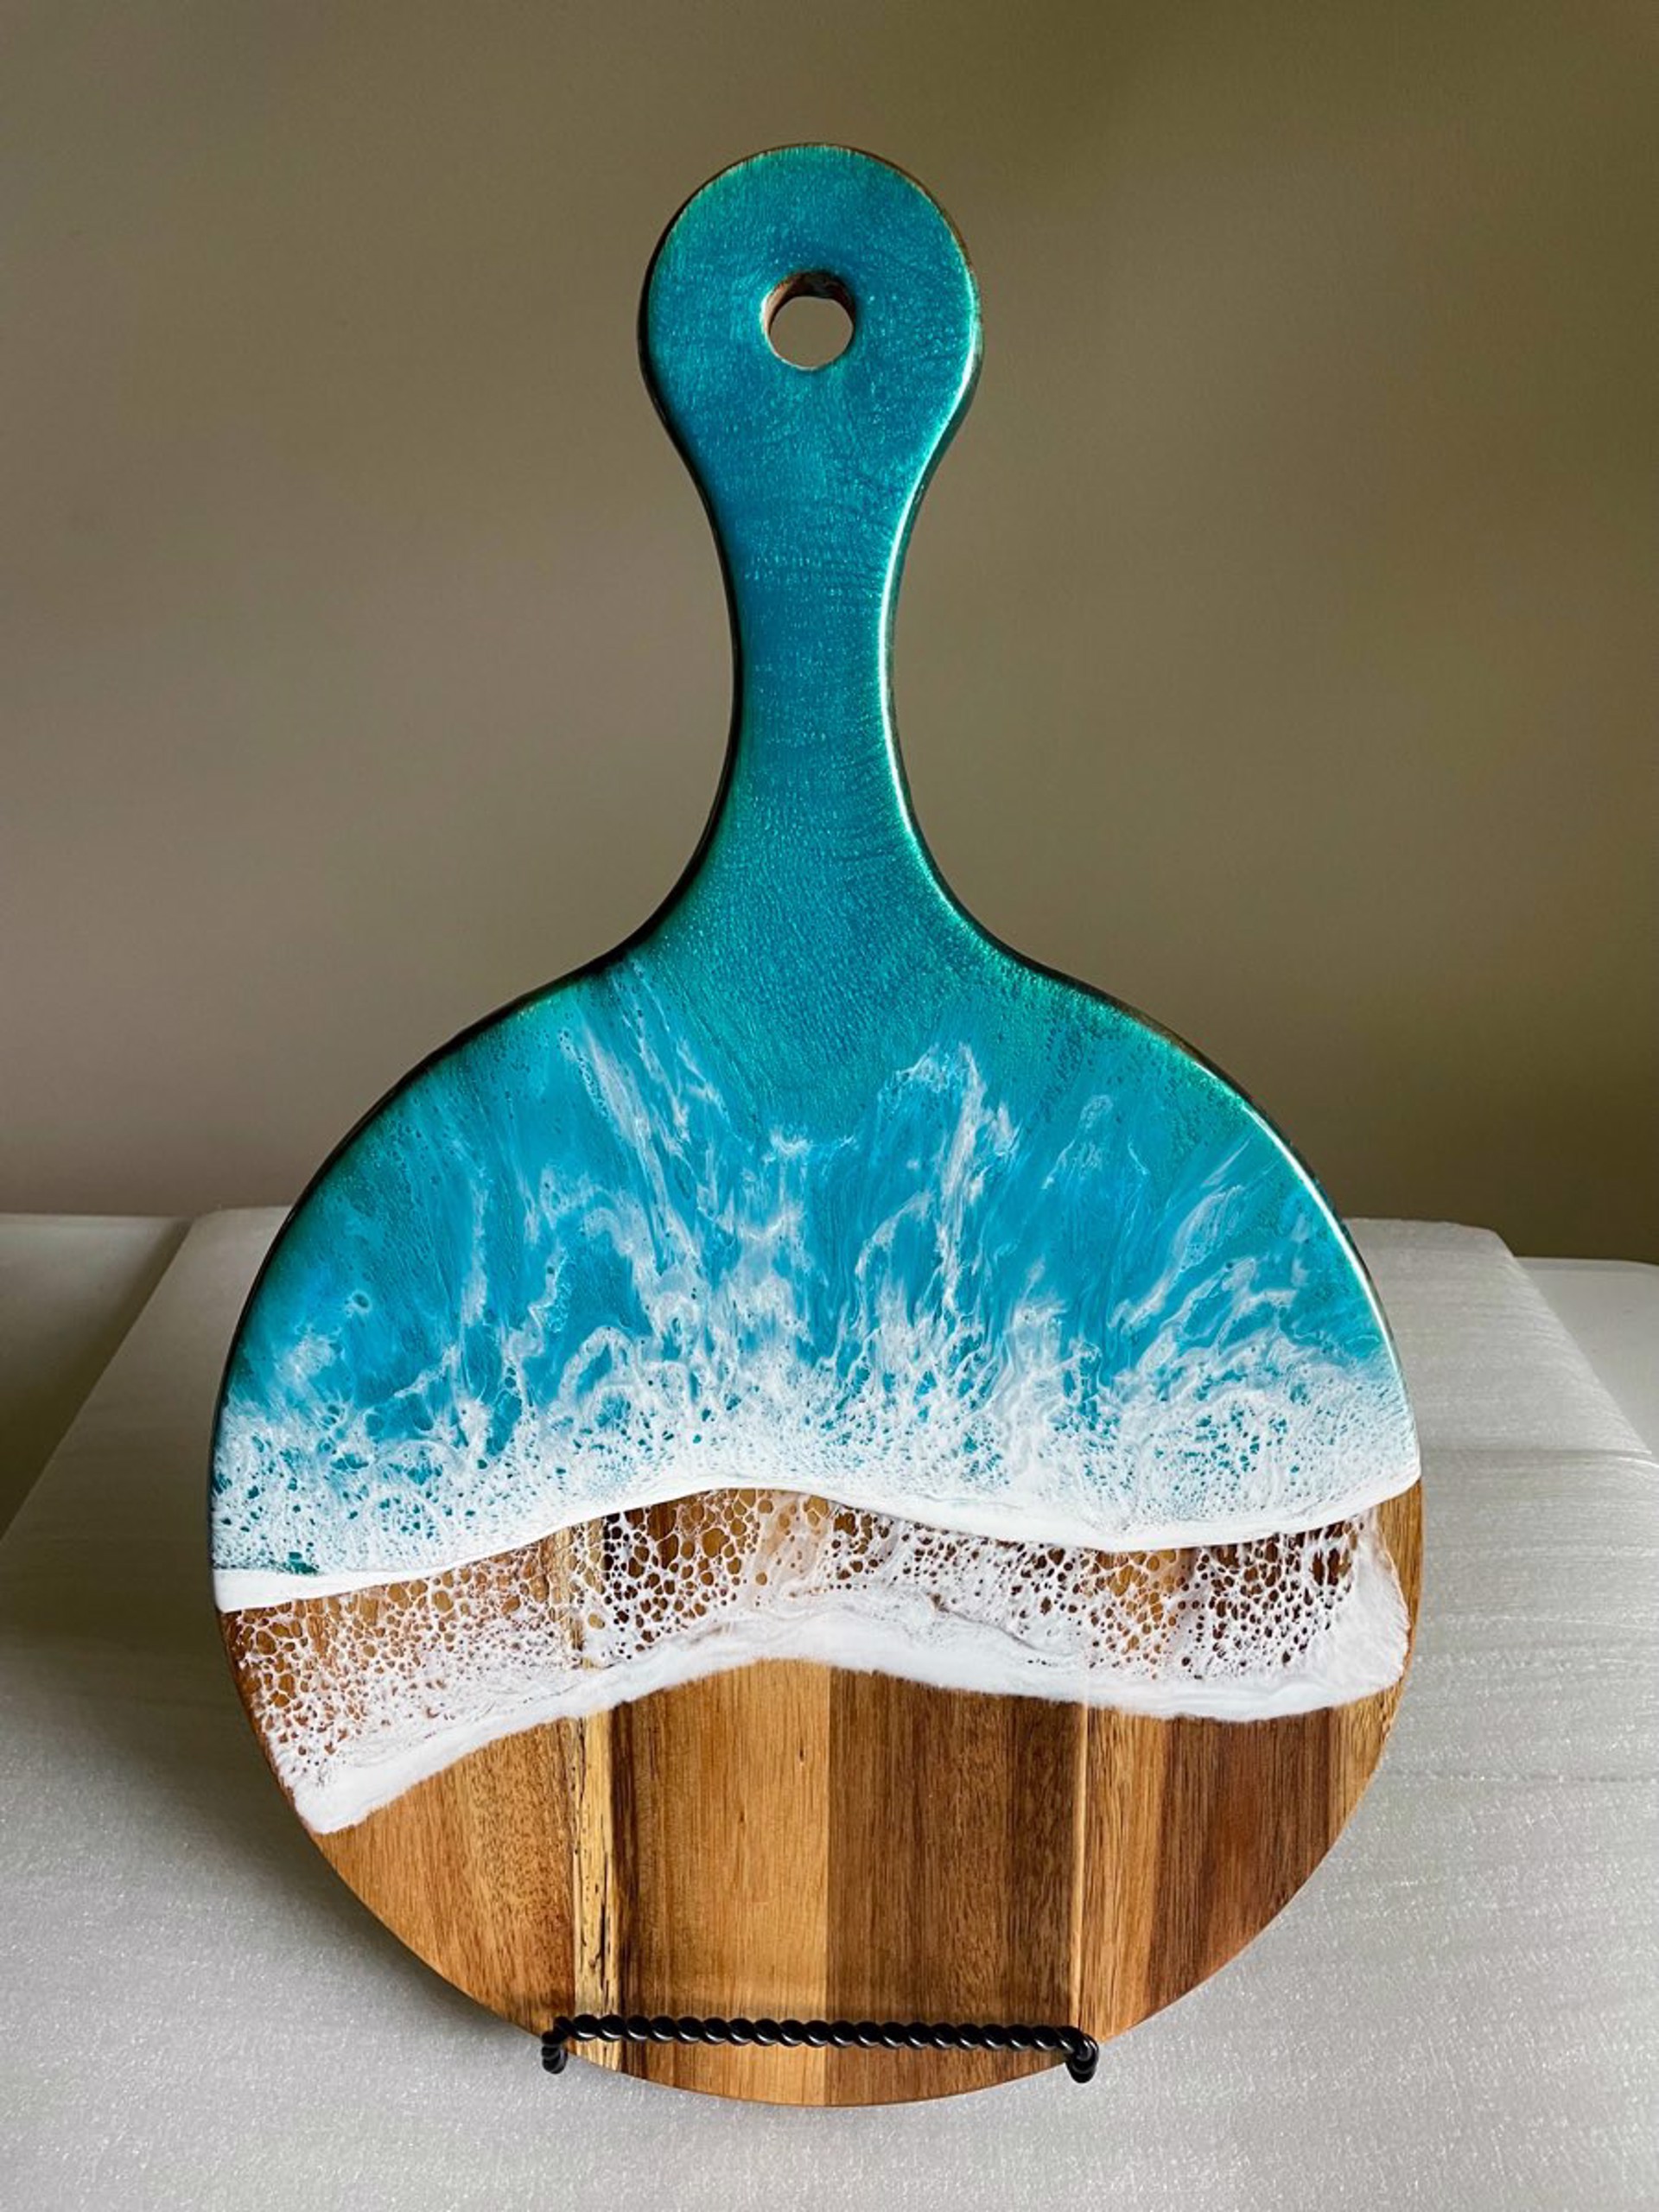 MDM22-16 Round Teal Resin and Wood Charcuterie Board by Mary Duke McCartt